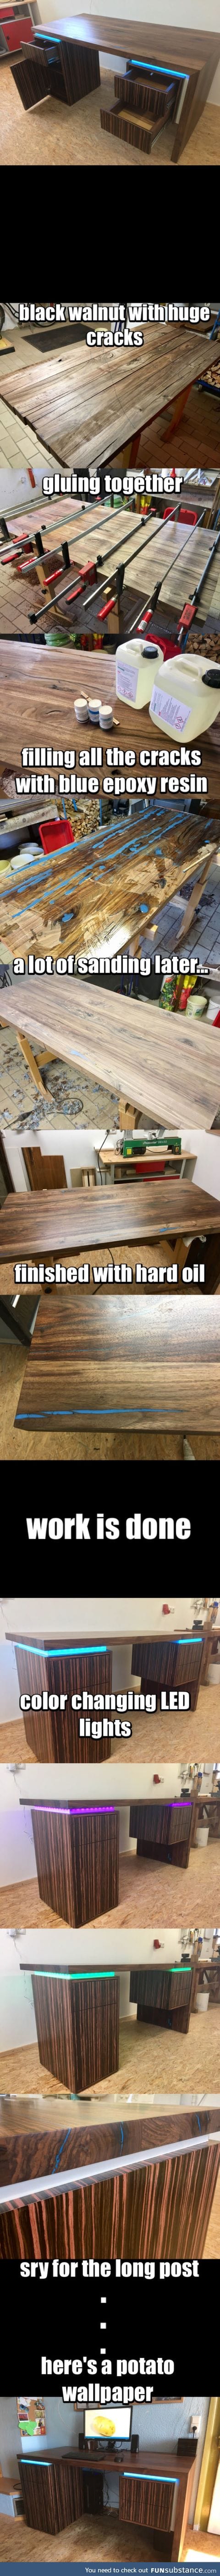 A desk made out of black walnut with blue epoxy inlay